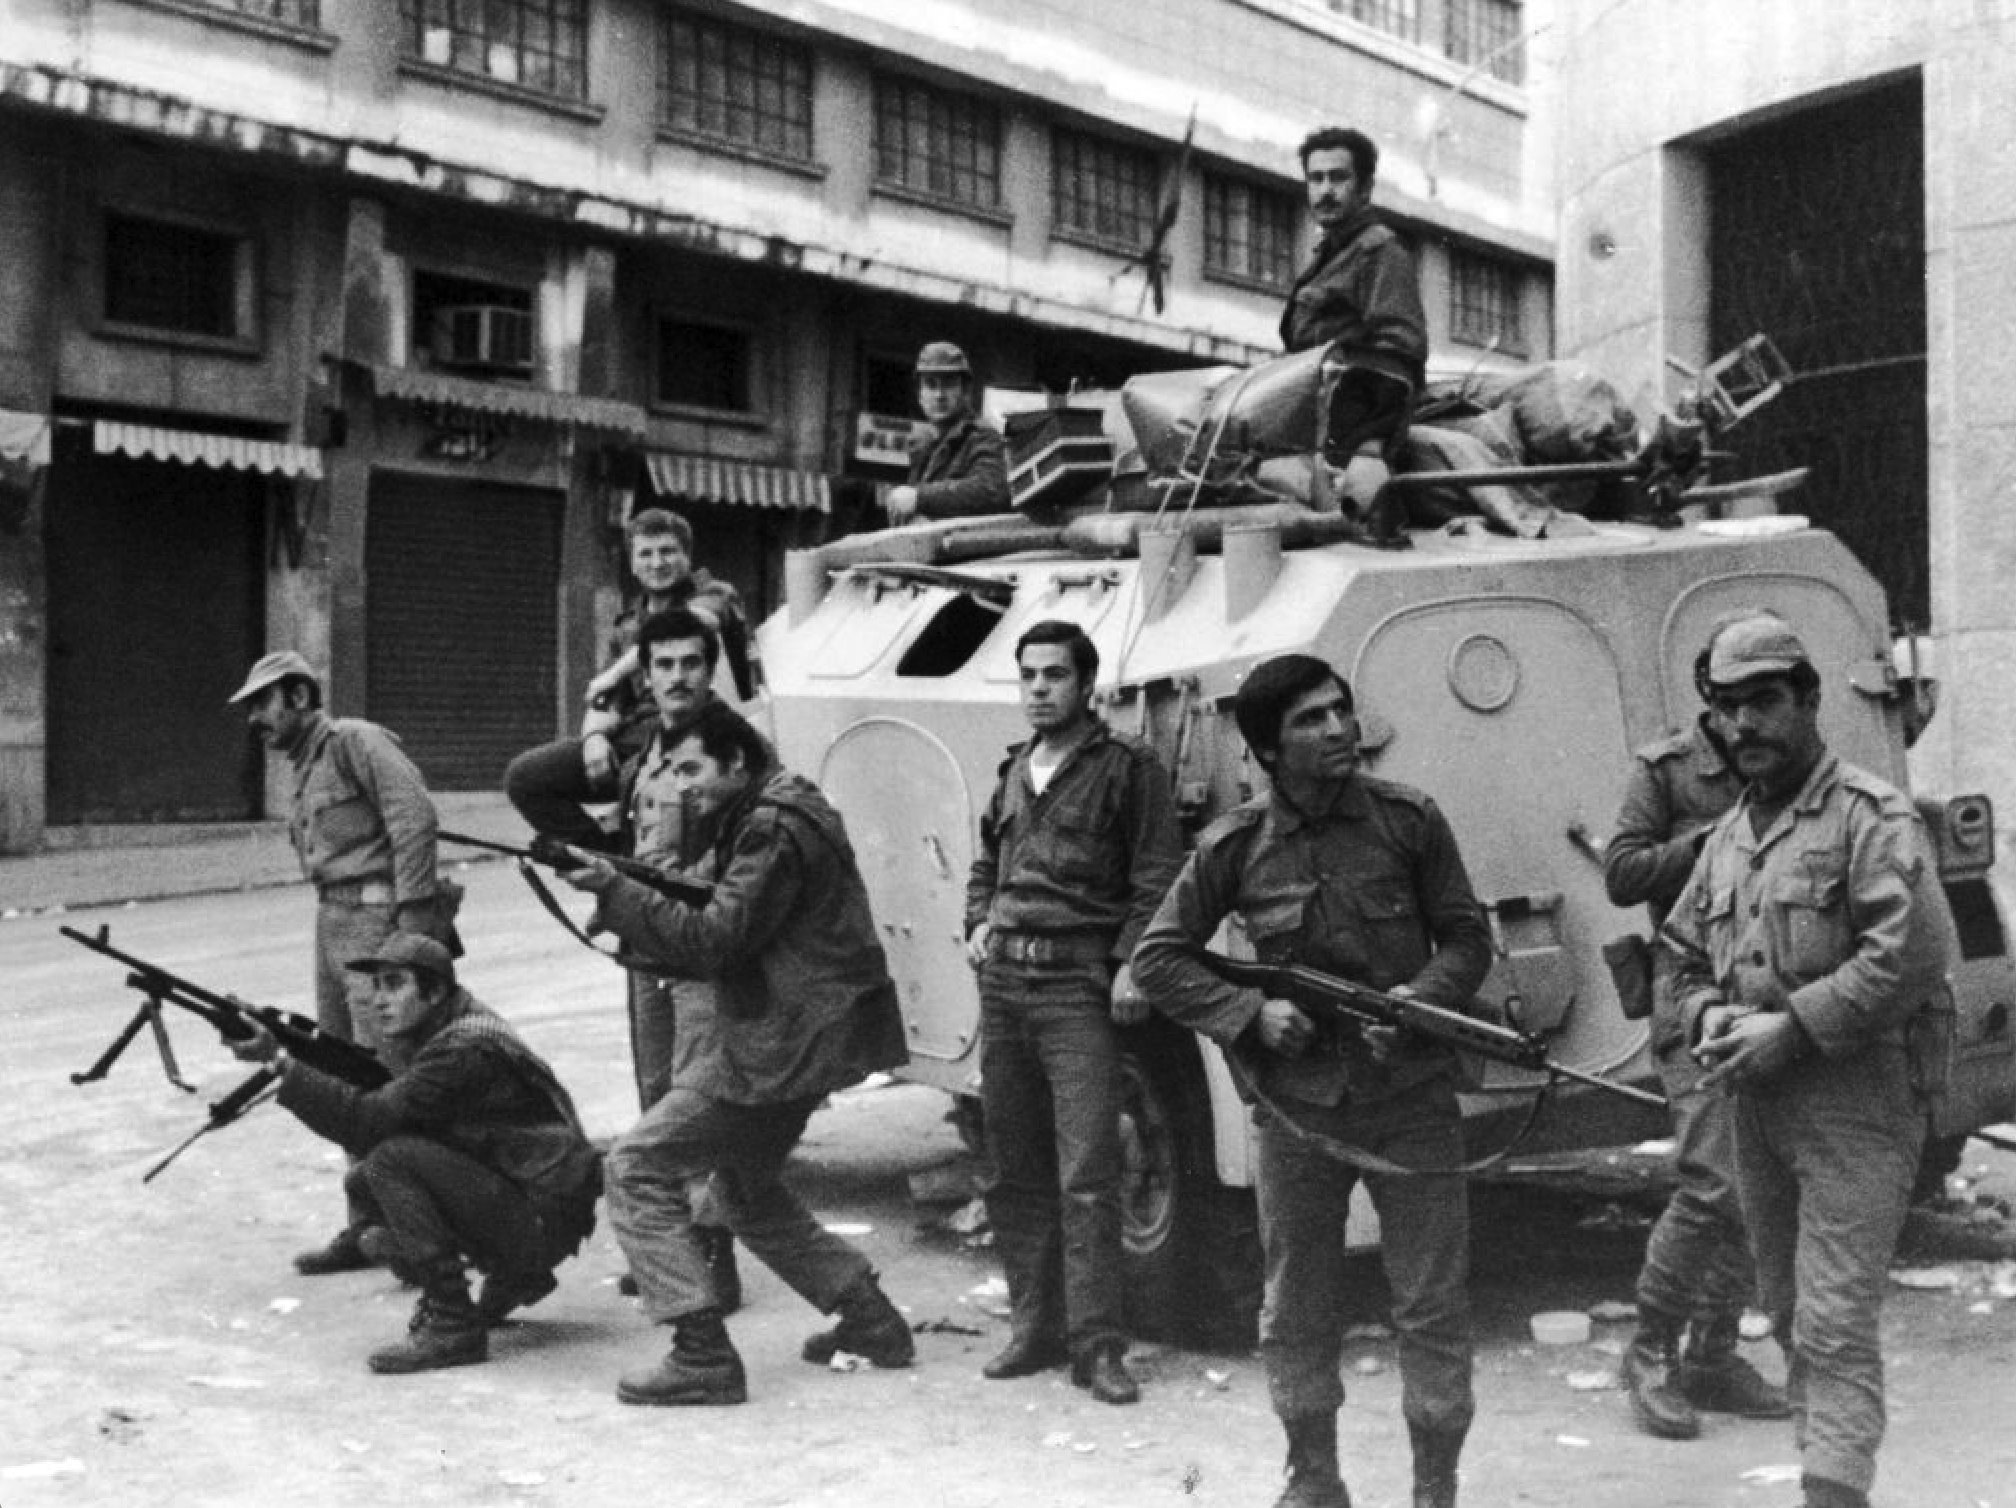 Shortly after the birth of Hassan Nasrallah, the civil war began in Lebanon